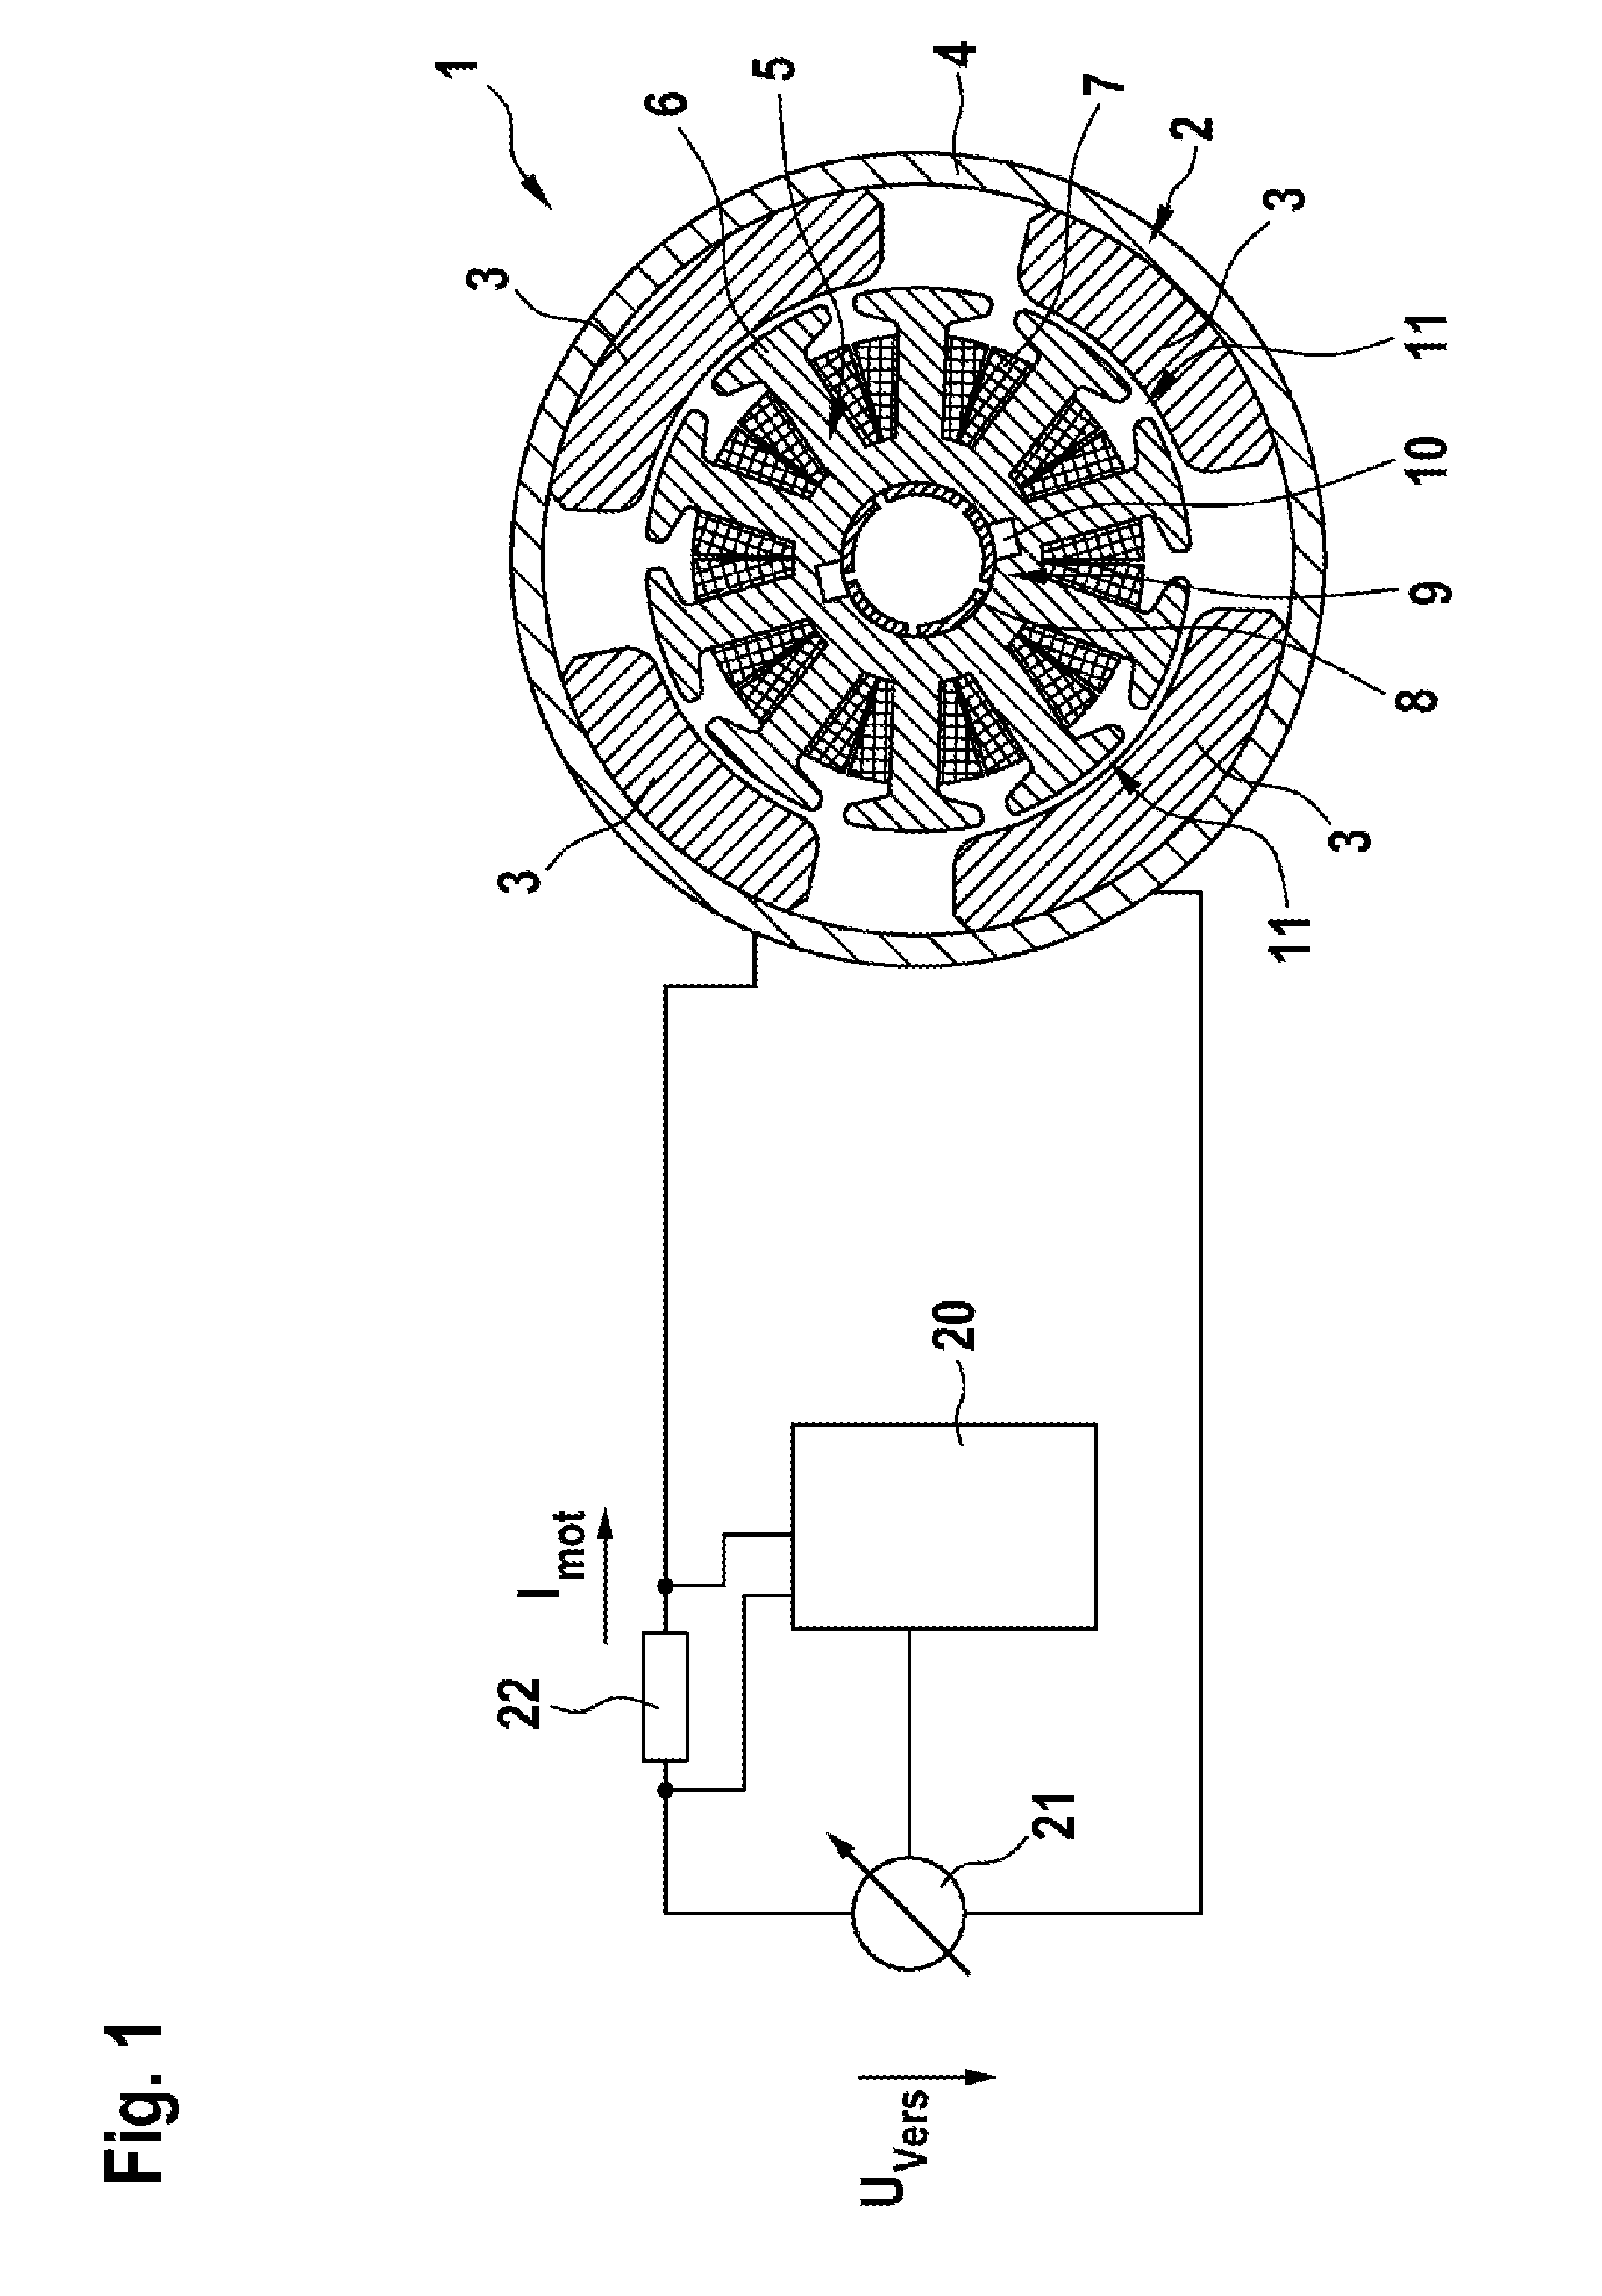 Method and apparatus for determining a rotor position and rotation speed of an electrical machine